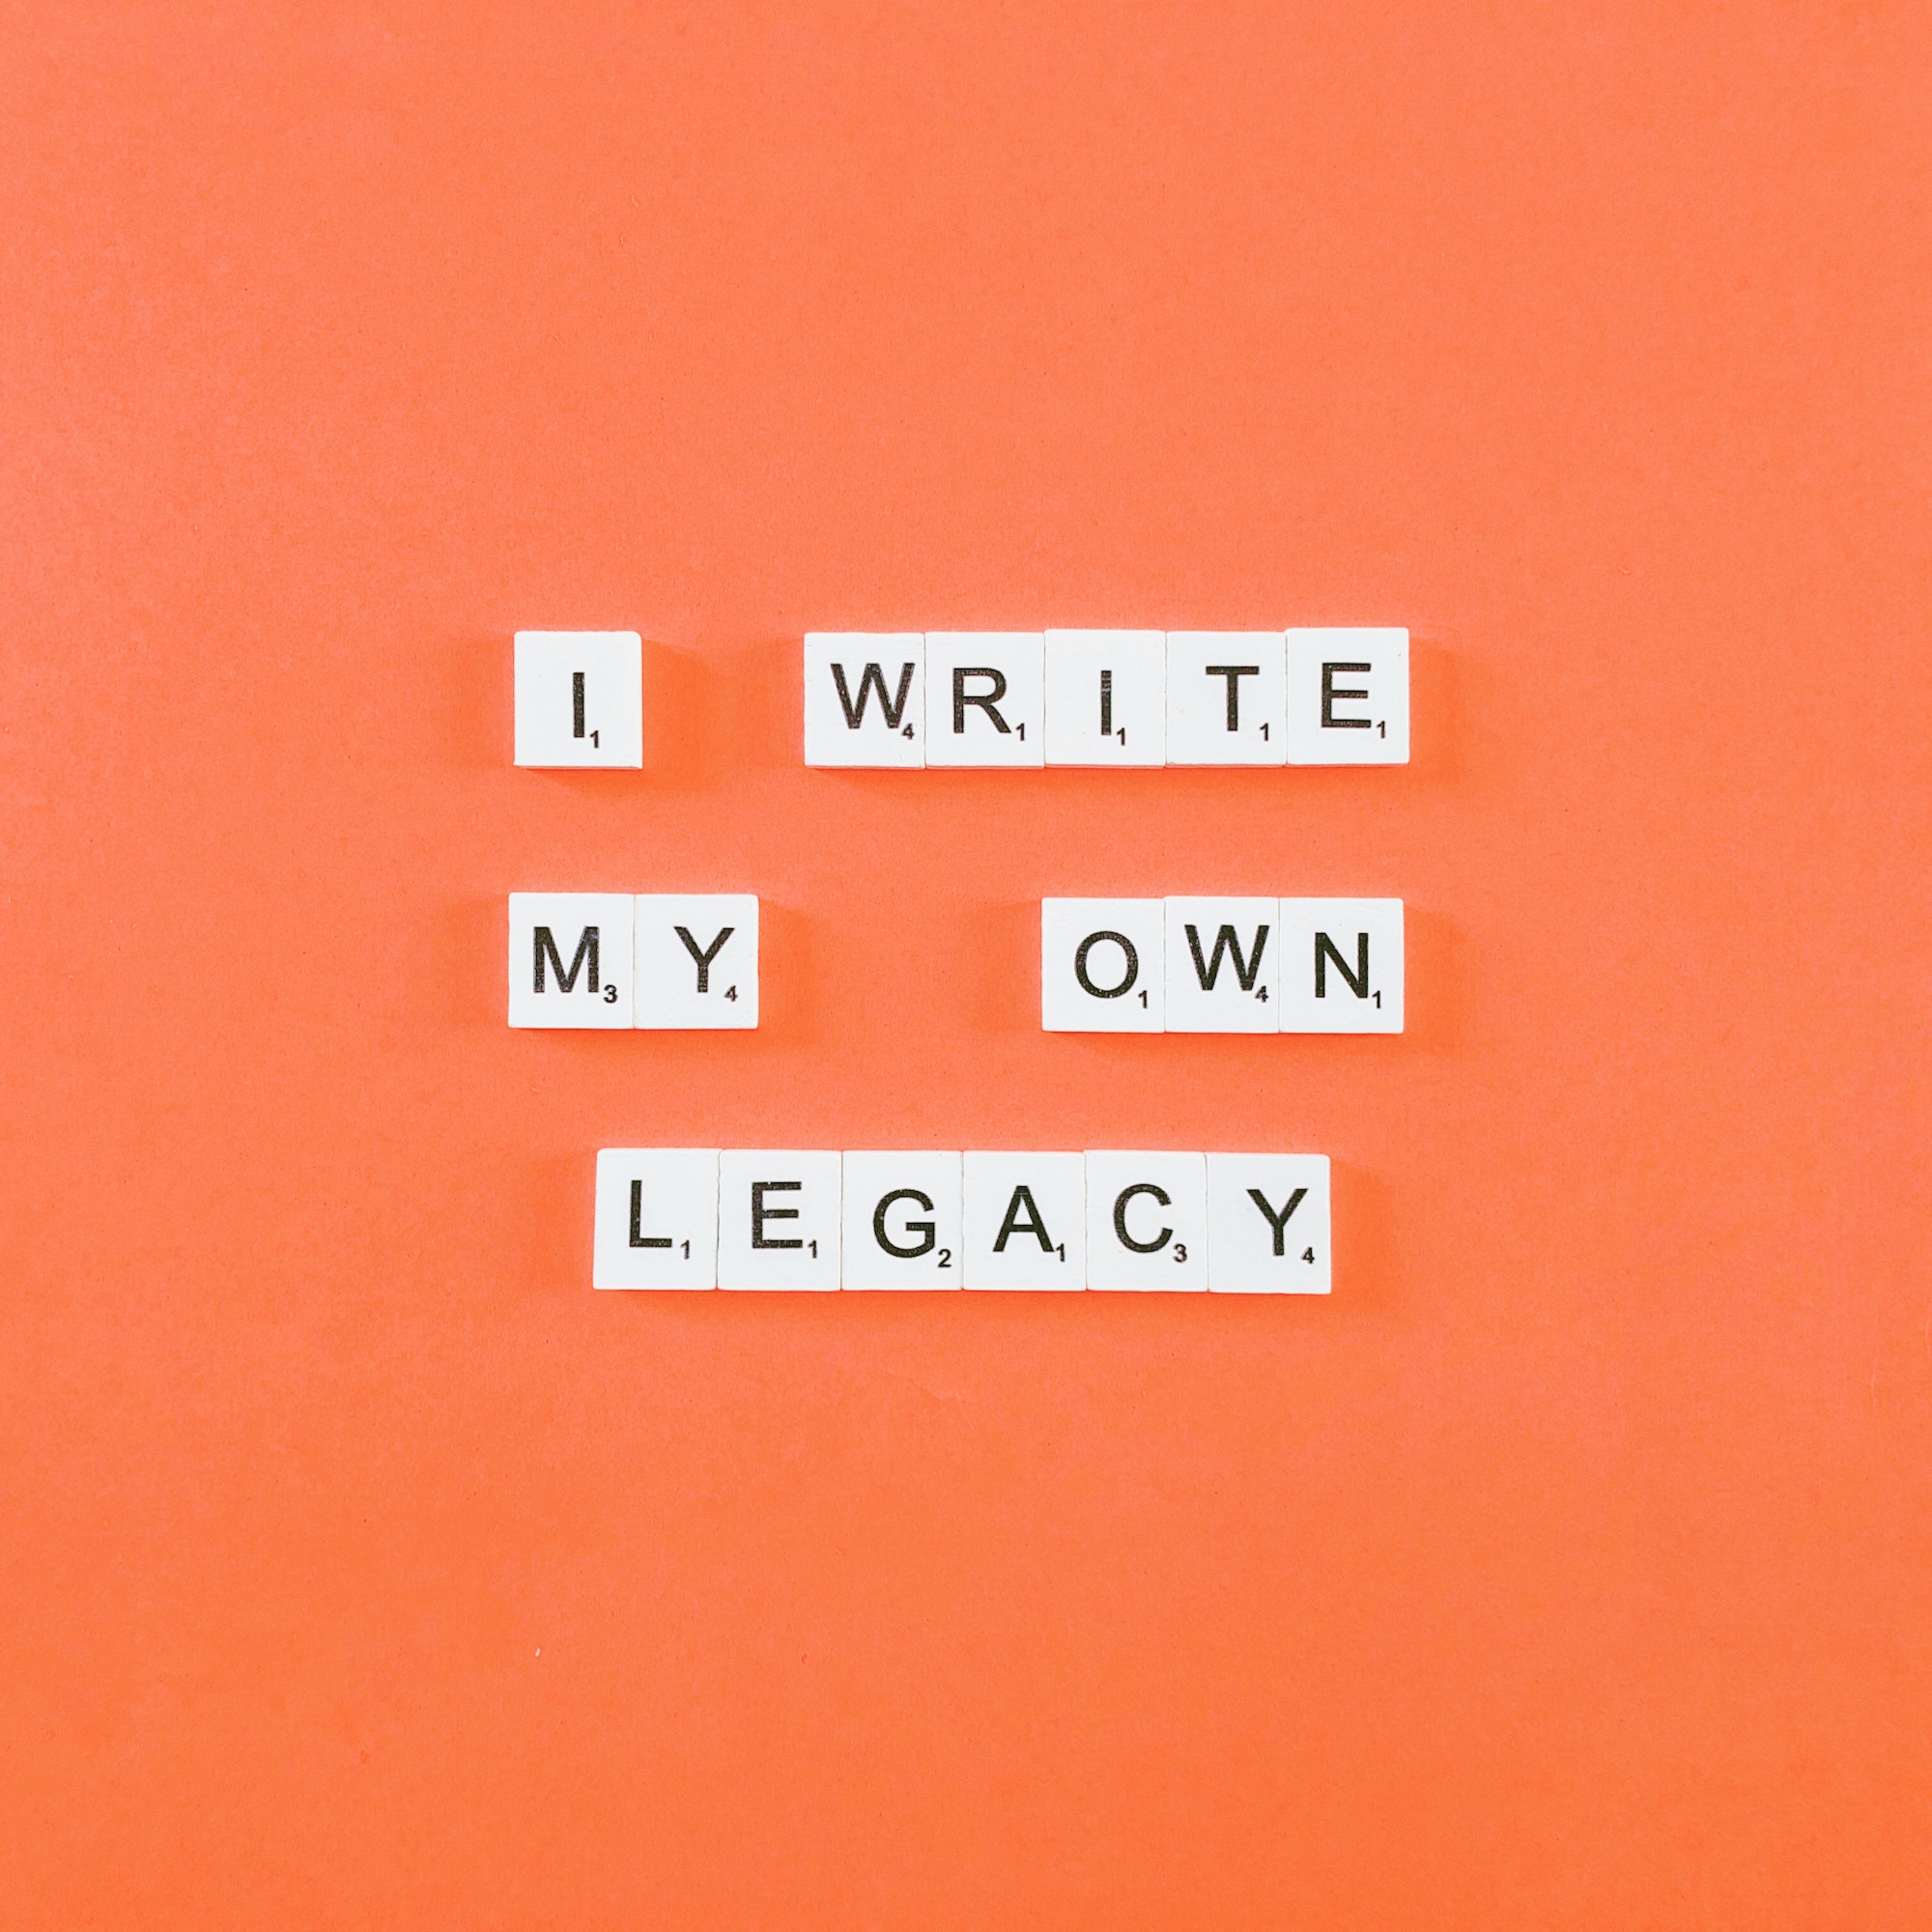 I wrote my own legacy.